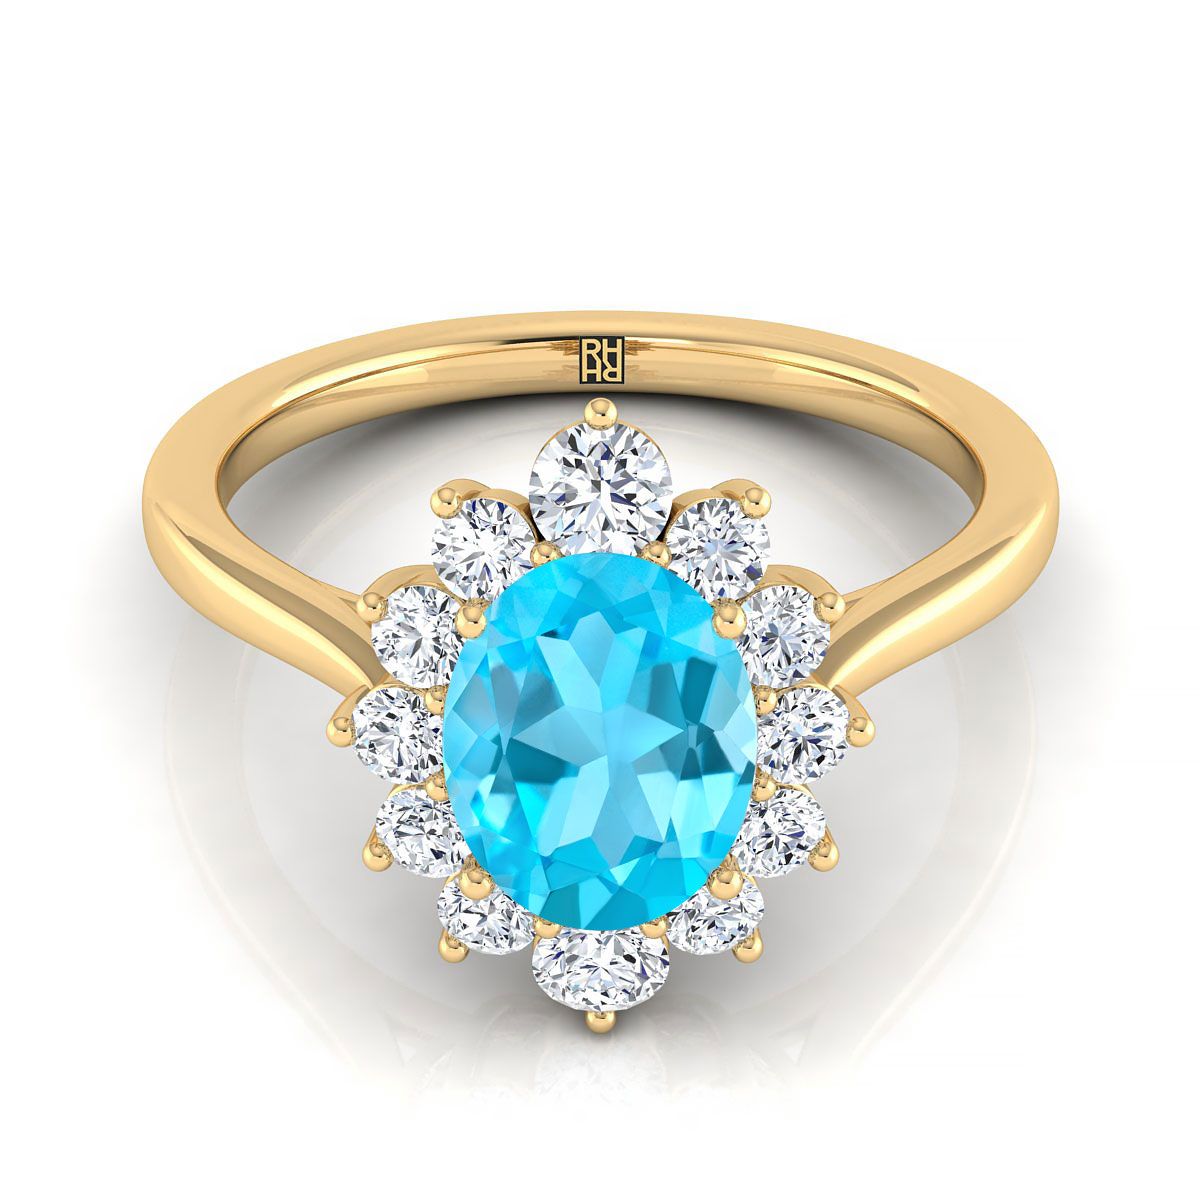 14K Yellow Gold Oval Swiss Blue Topaz Floral Diamond Halo Engagement Ring -1/2ctw